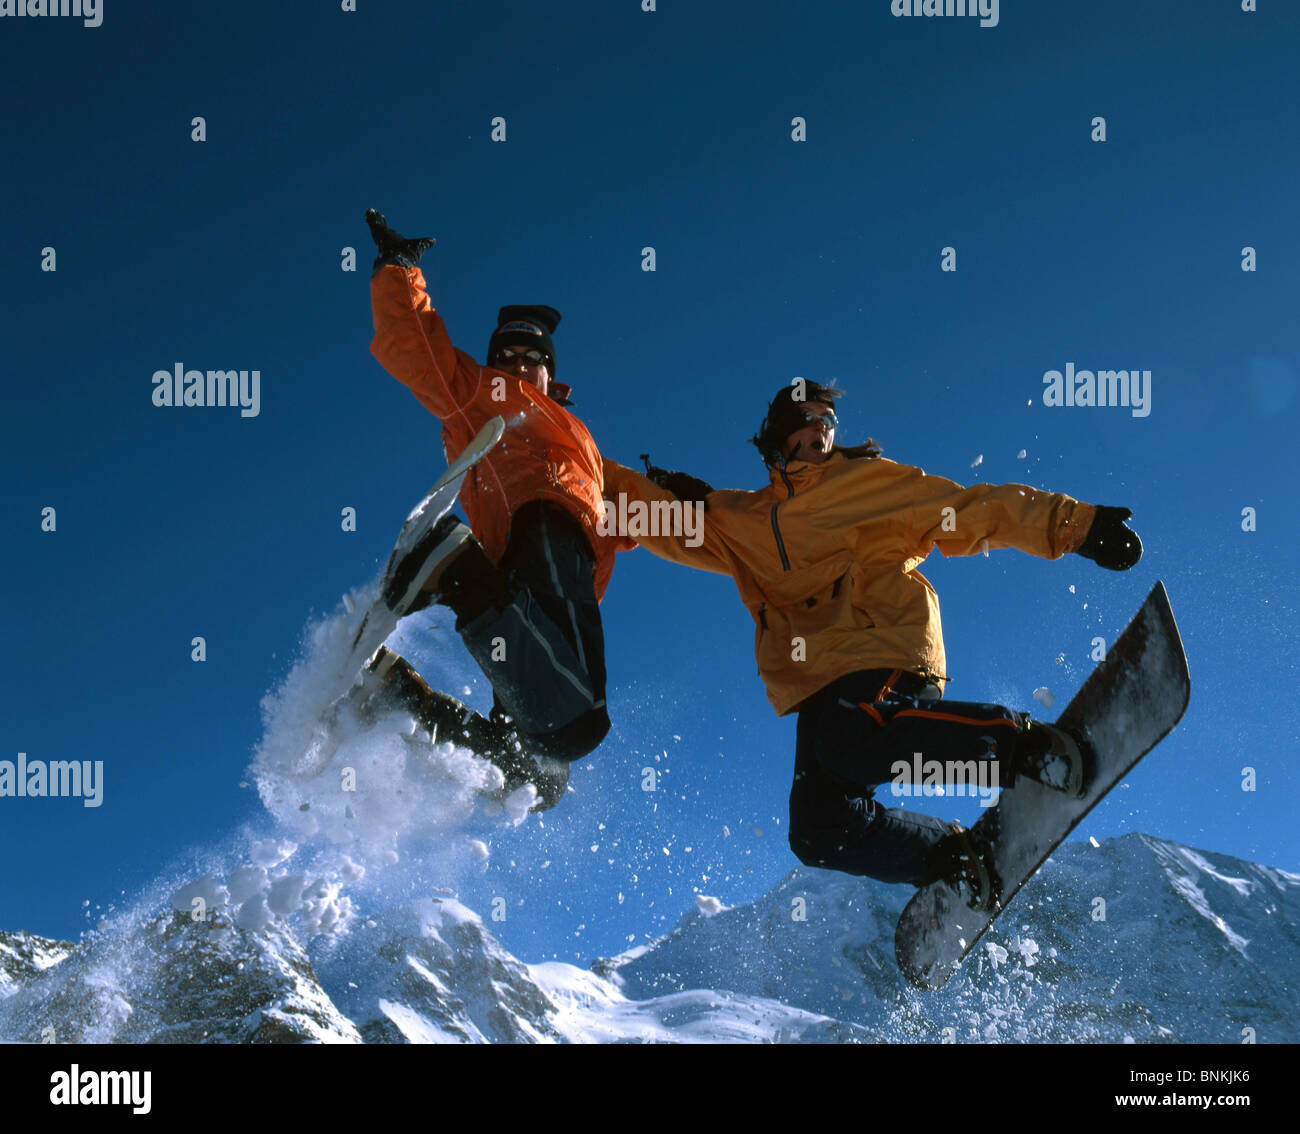 Switzerland winter sports persons two pair couple mountains jump Snow boarder snowboard orange freeride caper blue sky heaven Stock Photo